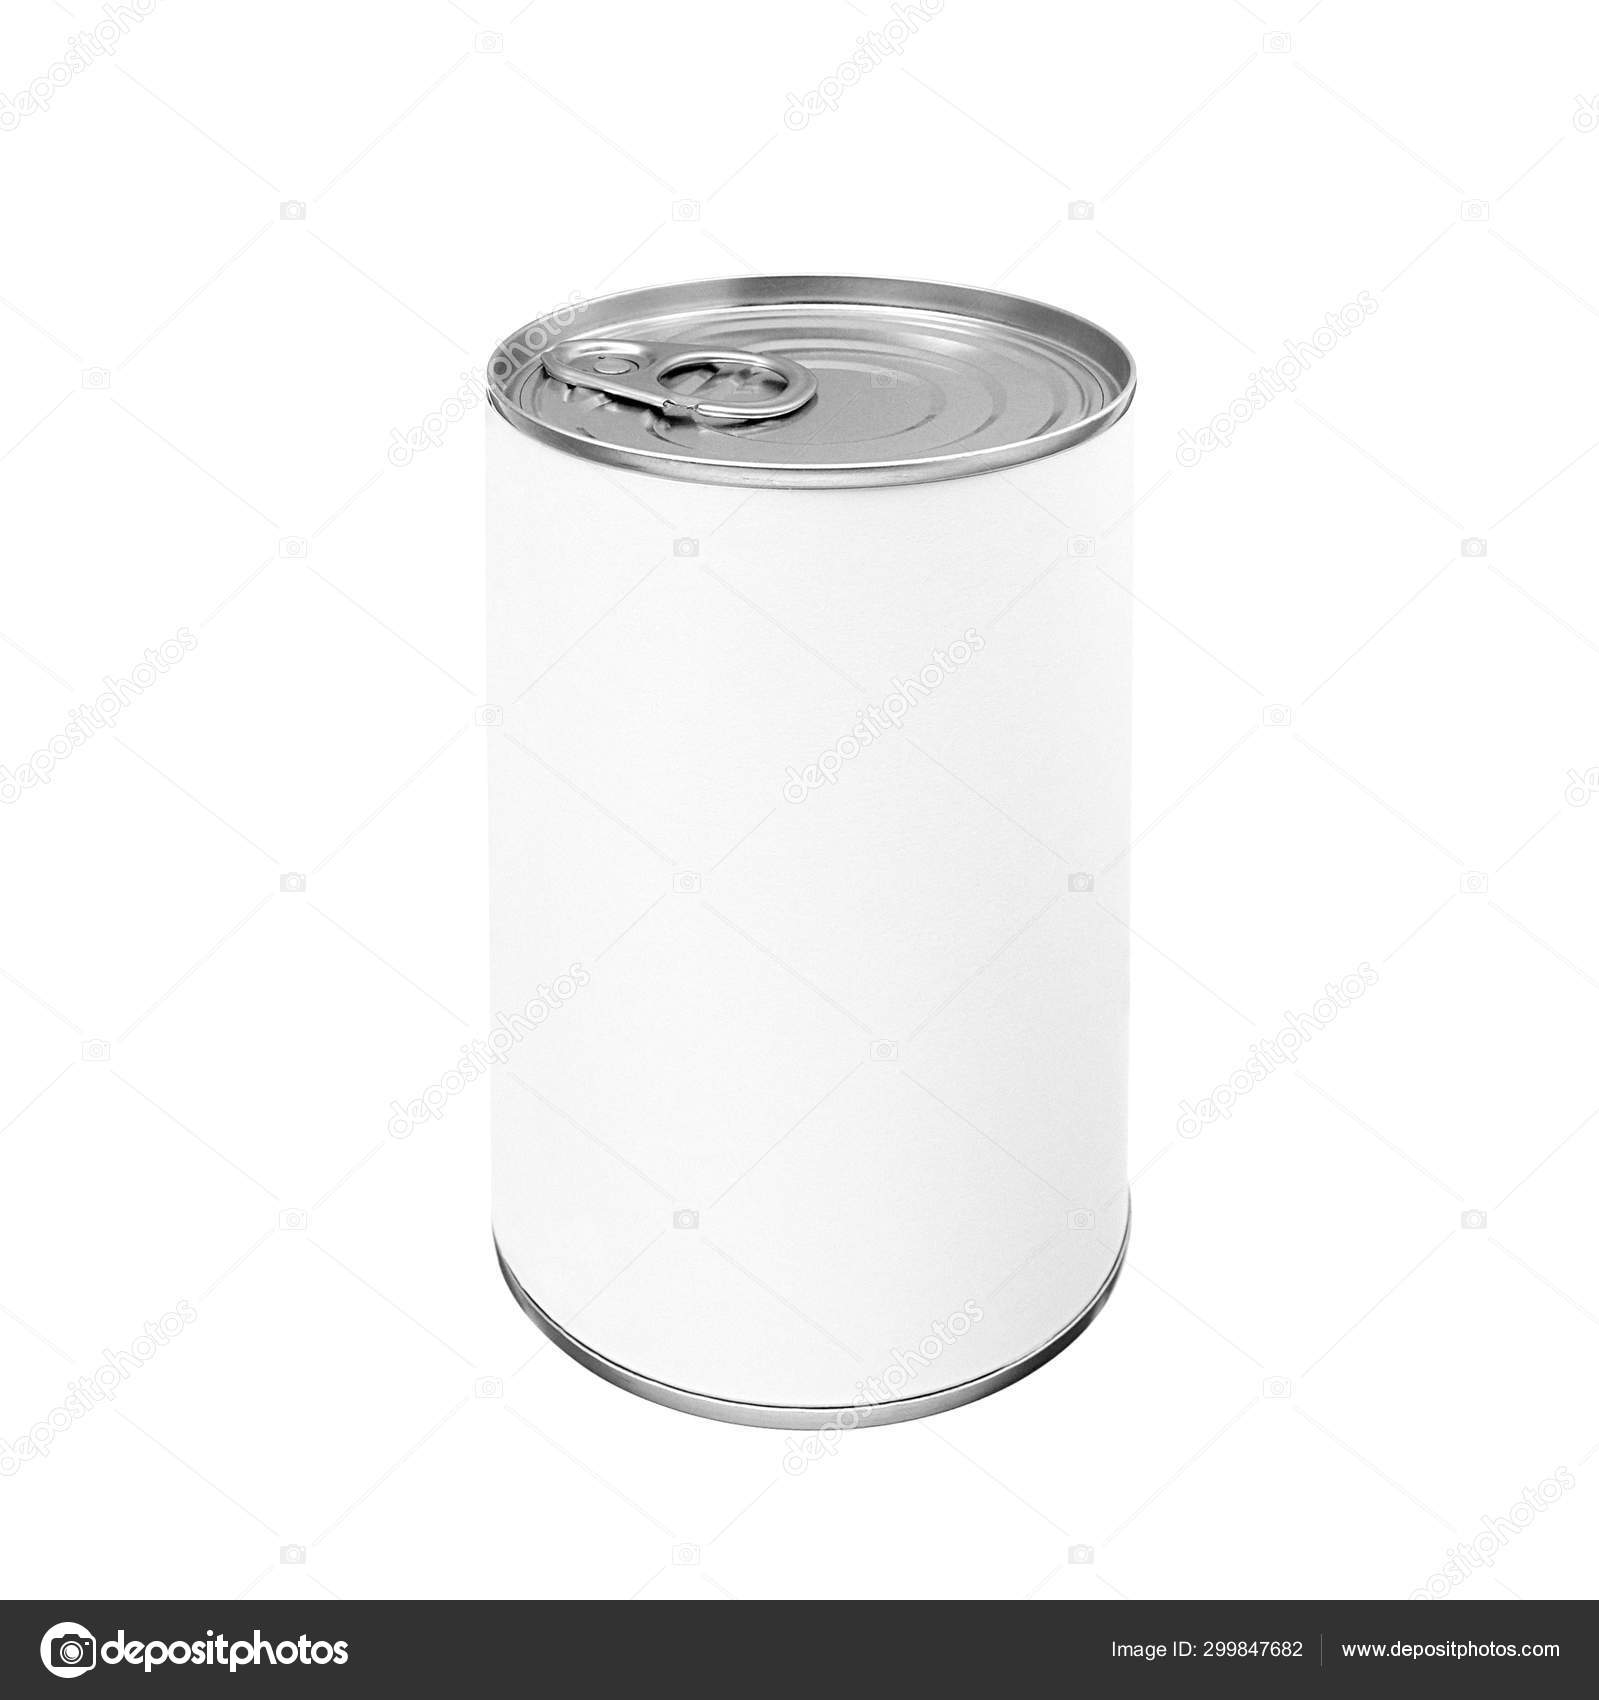 Download Food Tin Can Mockup With Blank White Label Isolated On White Stock Photo Image By C Cebas1 299847682